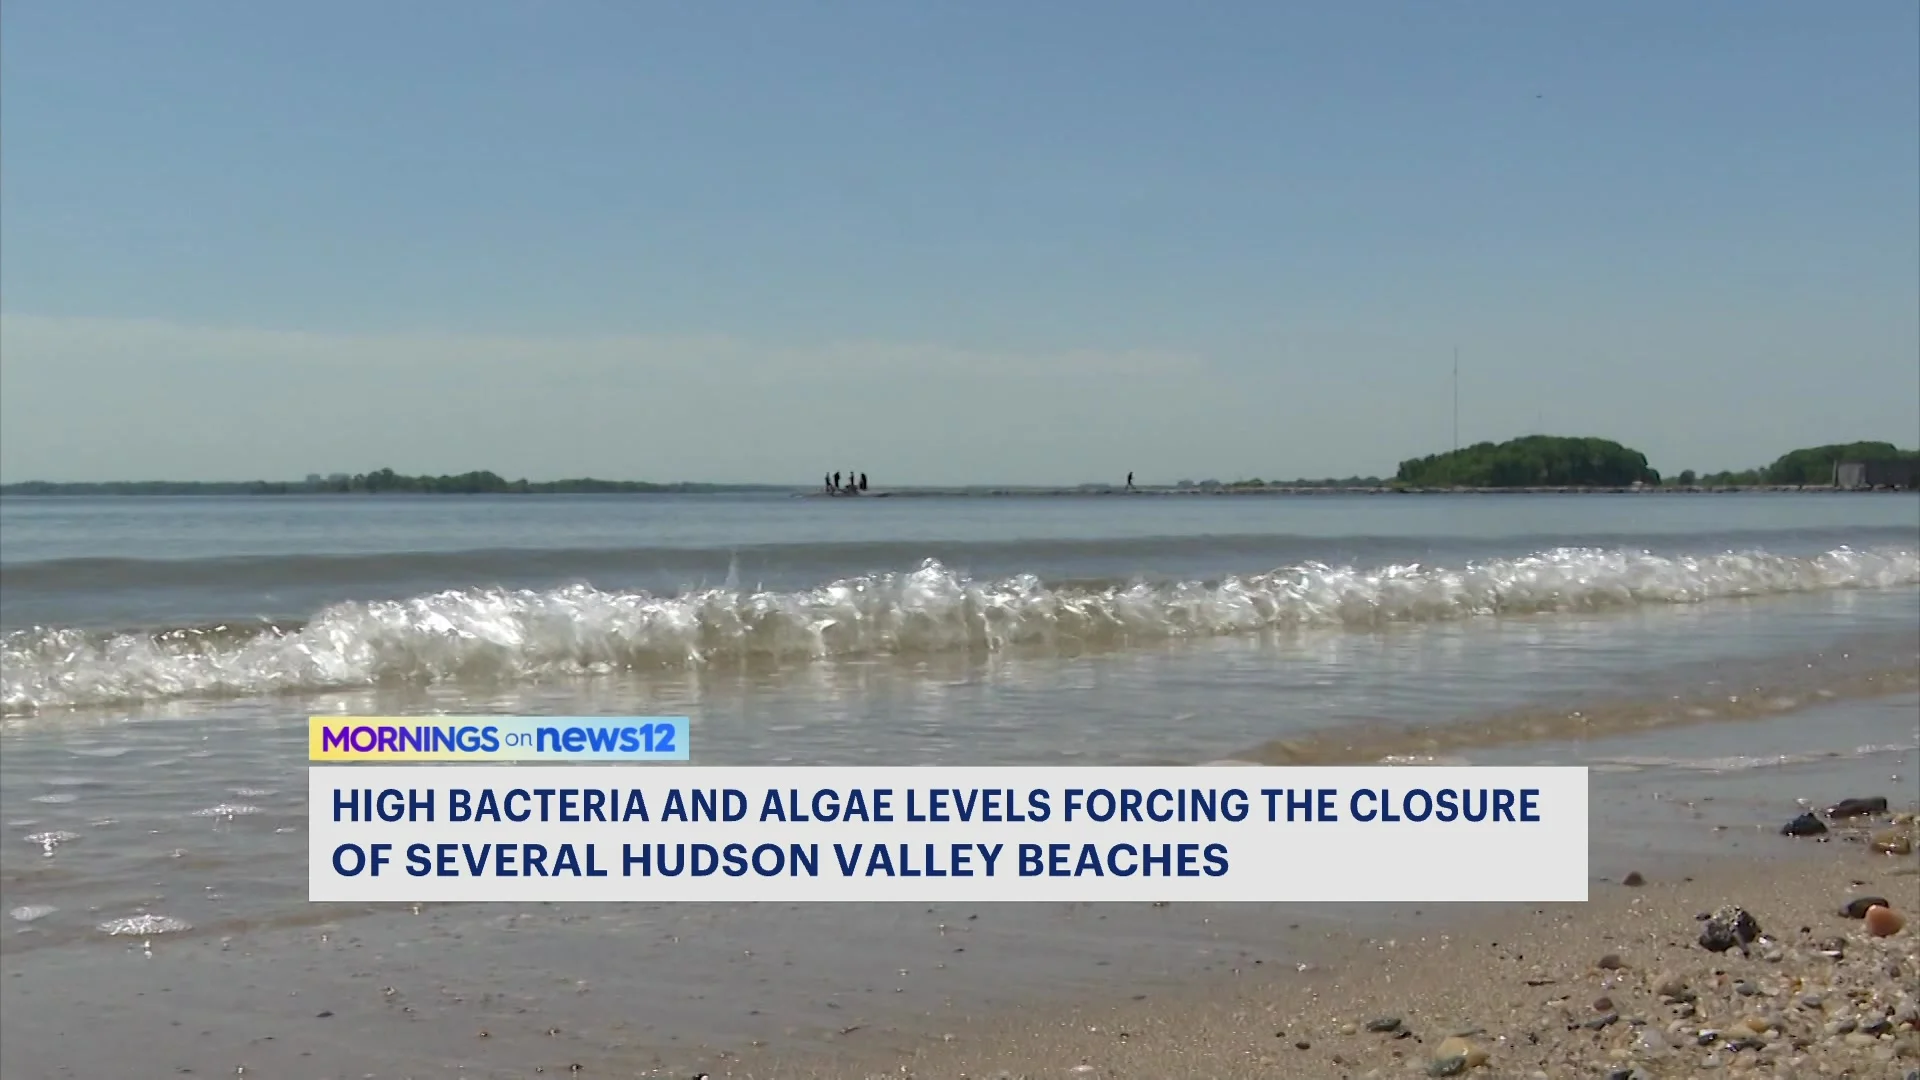 Lawmakers are trying to force the state to act as more beaches are closed due to bacterial contamination